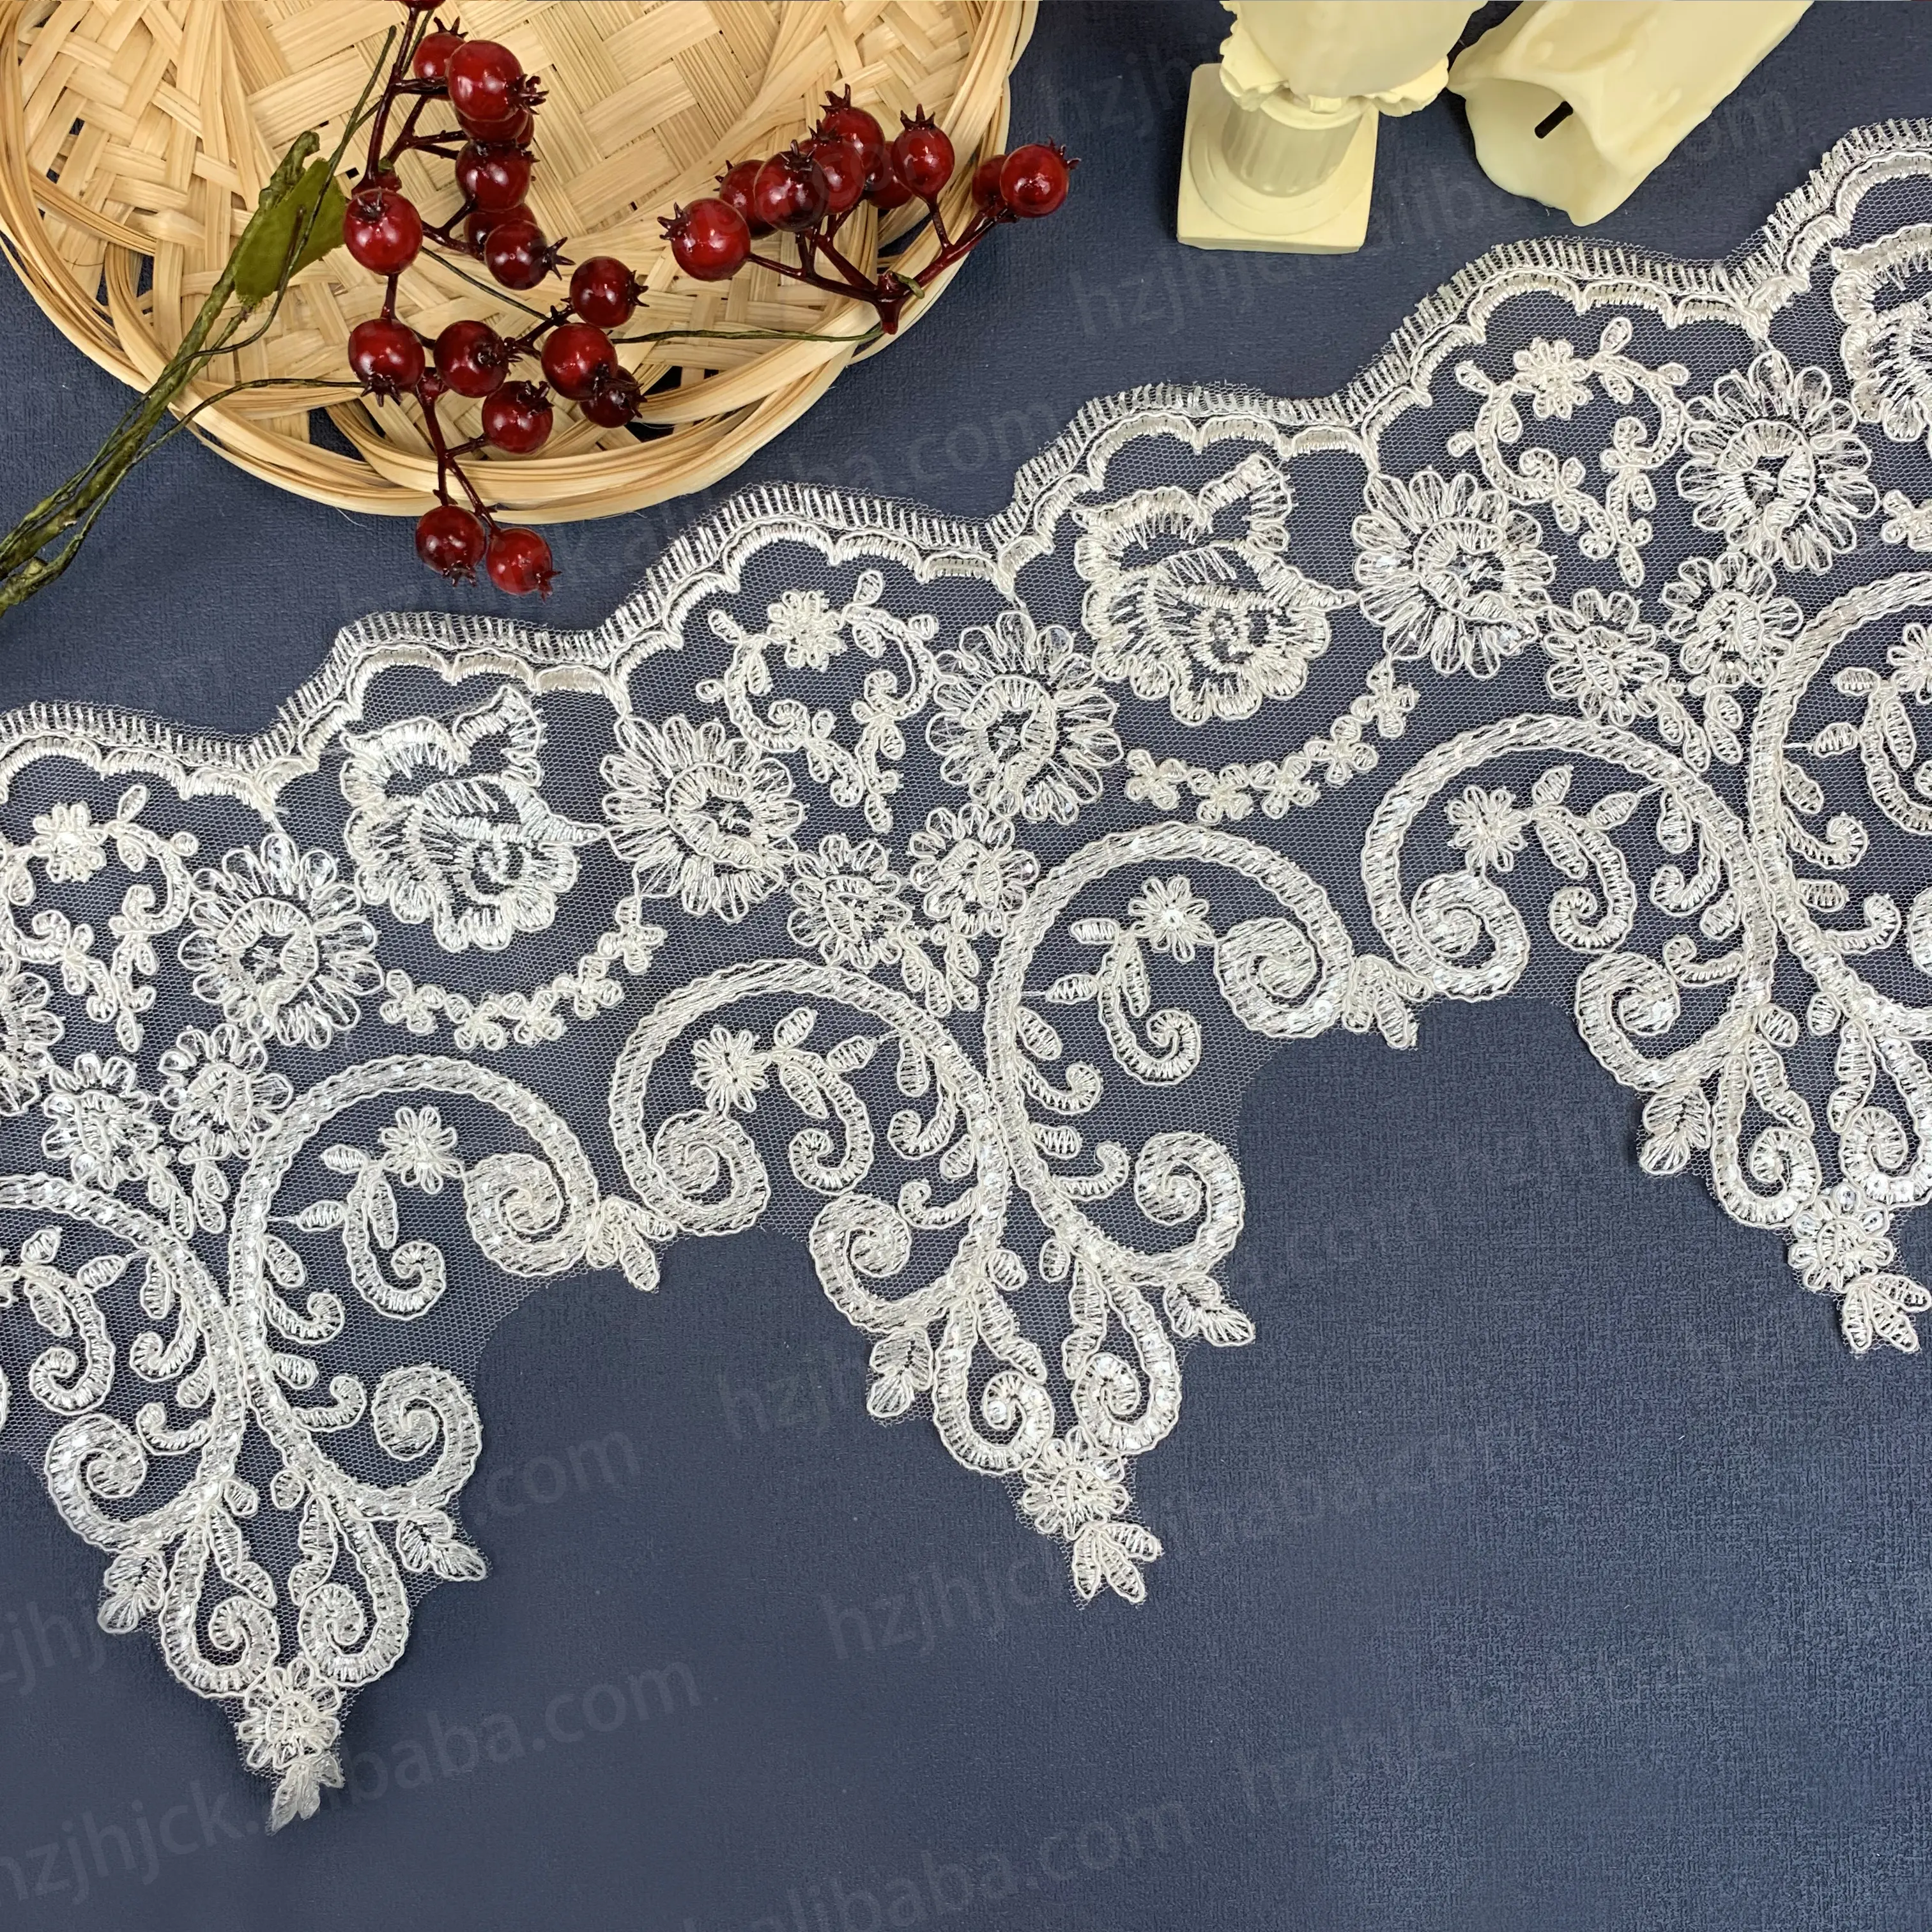 New Hot selling Sequin Wedding Embroidered Border Trimming Lace Trim For Dress Clothes Tablecloth Curtain Sewing